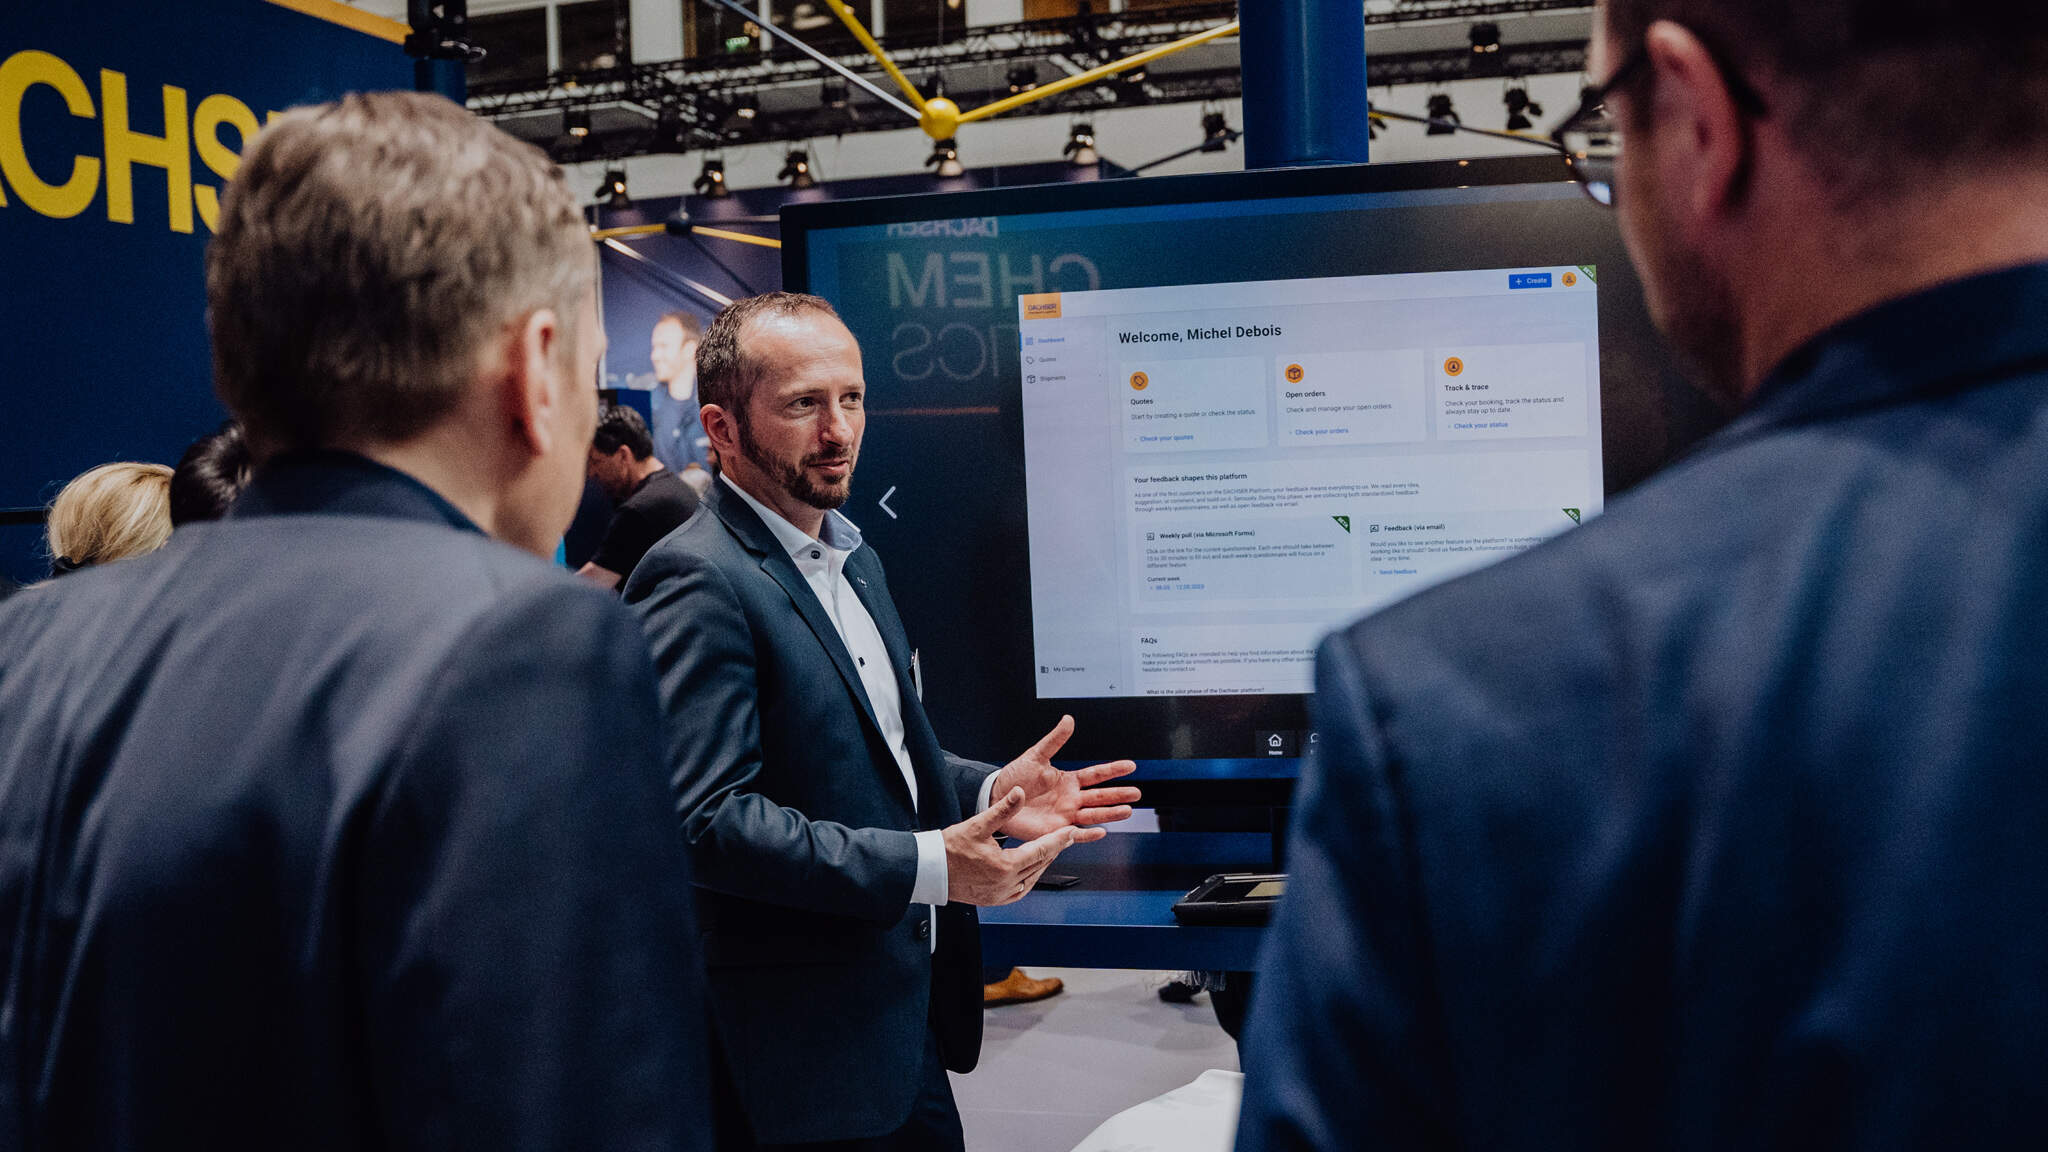 Ralf Messing, Team Leader eLogistics Consulting at DACHSER, demonstrates the dashboard at the transport logistic trade fair in Munich.